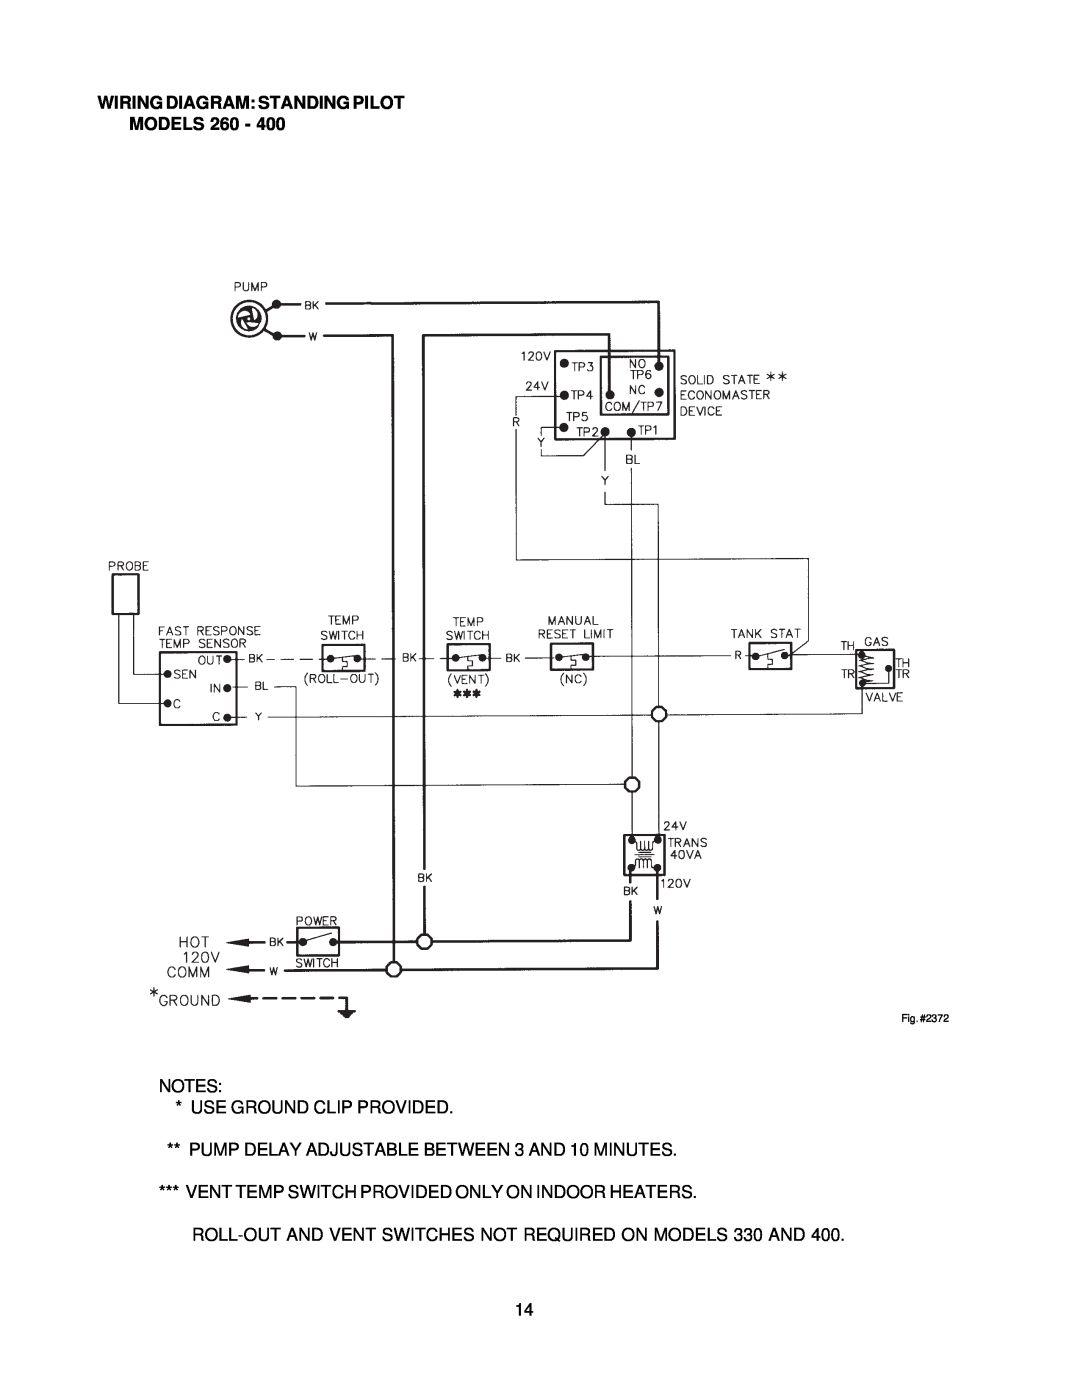 Raypak 260-401 manual Wiring Diagram Standing Pilot Models, Notes Use Ground Clip Provided, Fig. #2372 